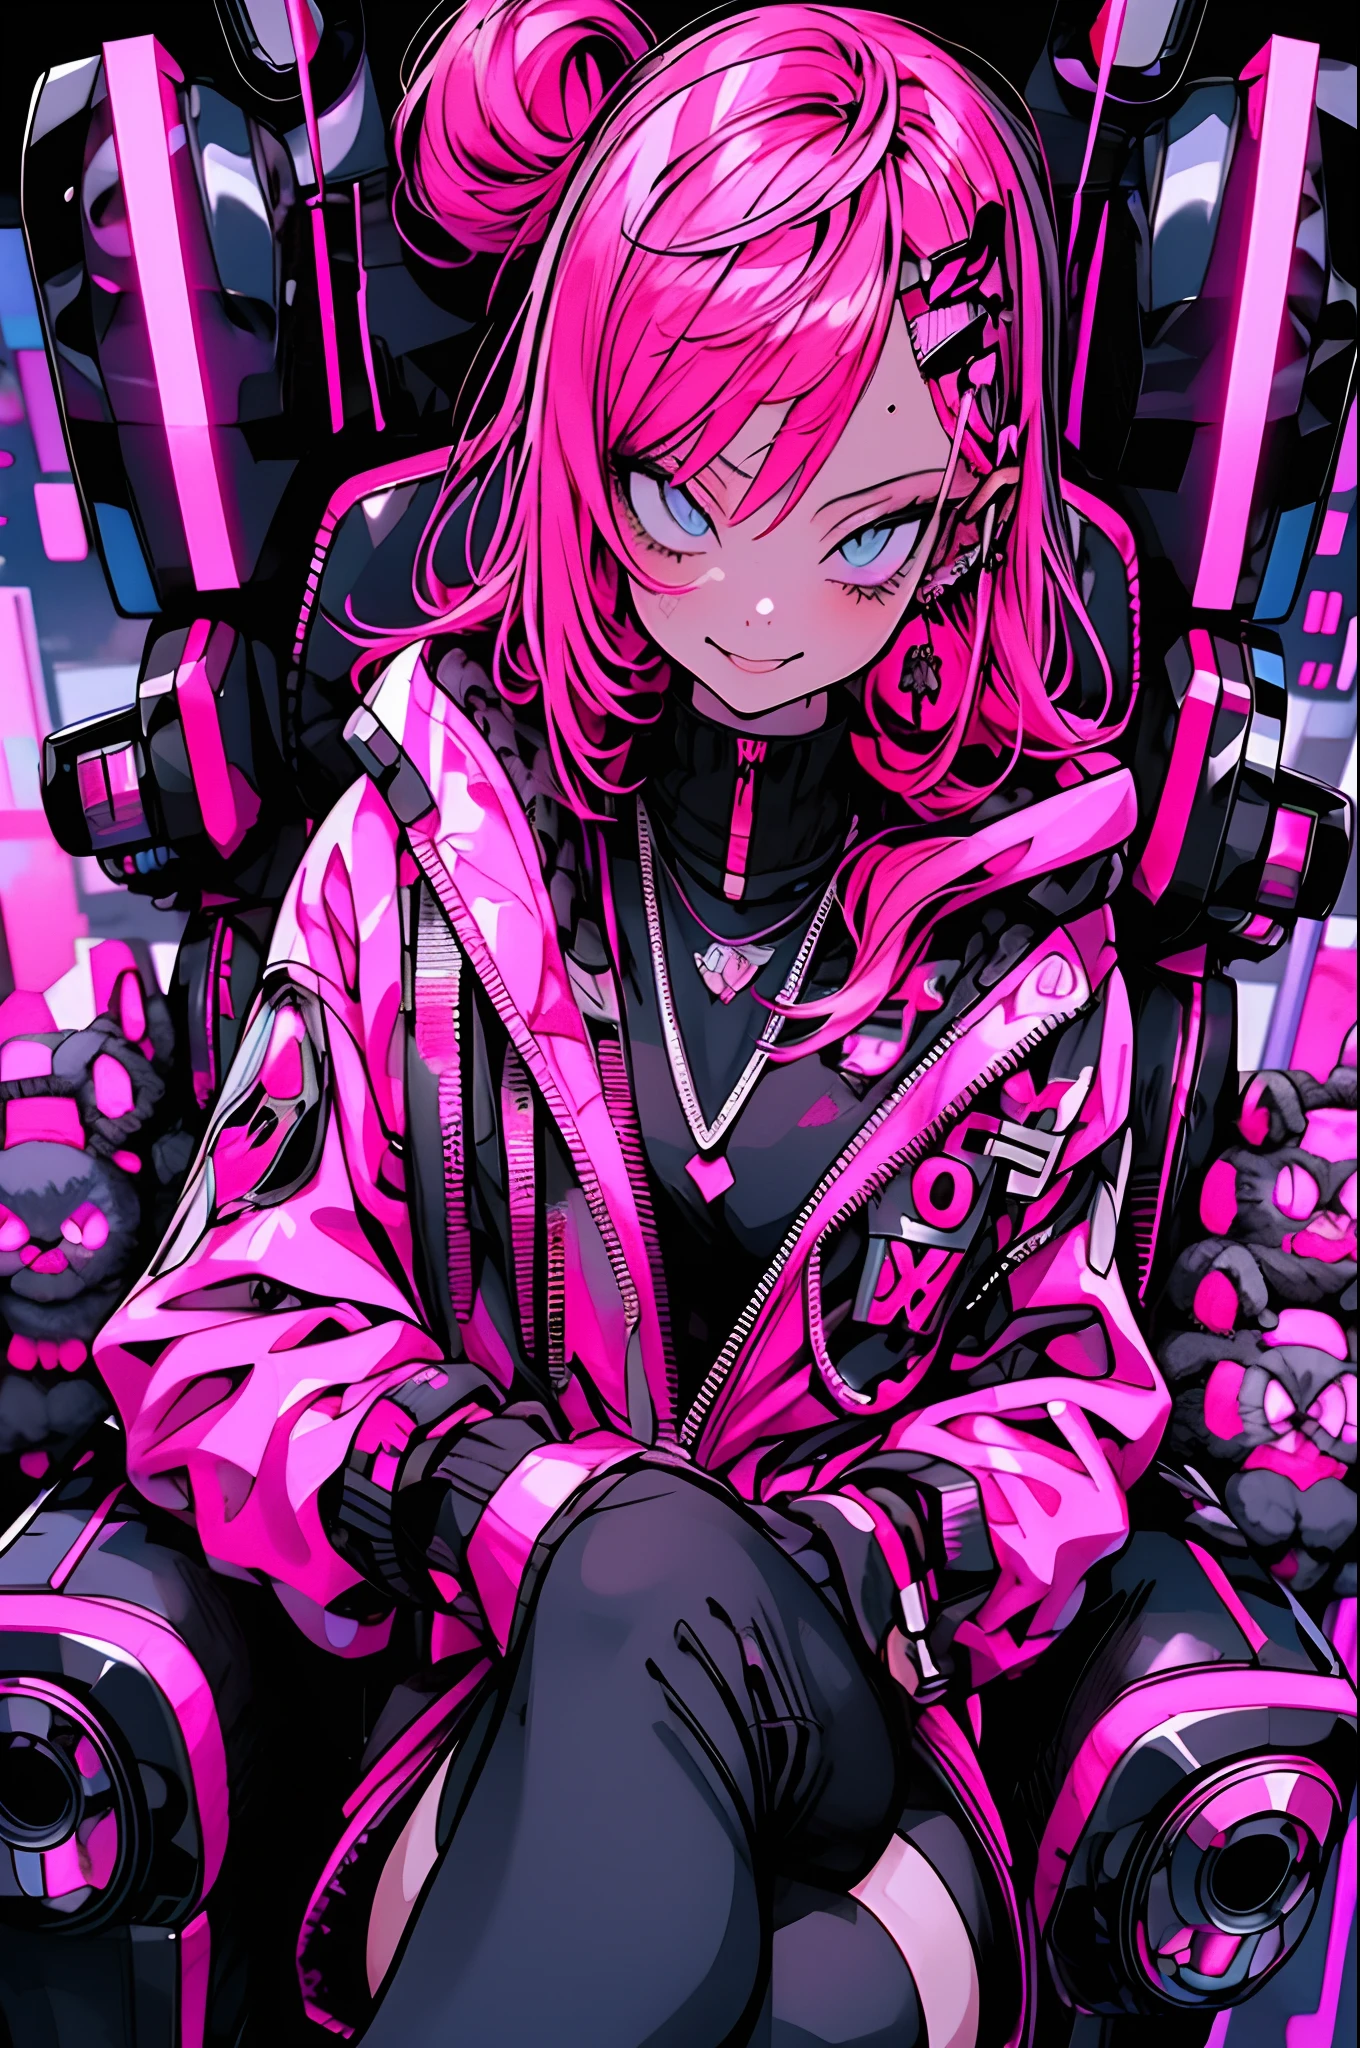 anime girl with pink hair sitting on a chair in a neon city, big smile, cyberpunk anime girl in hoodie, cyberpunk anime girl, anime style 4 k, anime cyberpunk art, best anime 4k konachan wallpaper, digital cyberpunk anime art, female cyberpunk anime girl, digital cyberpunk - anime art, cyberpunk anime art, anime cyberpunk, cyberpunk streetwear, cyberpunk art style